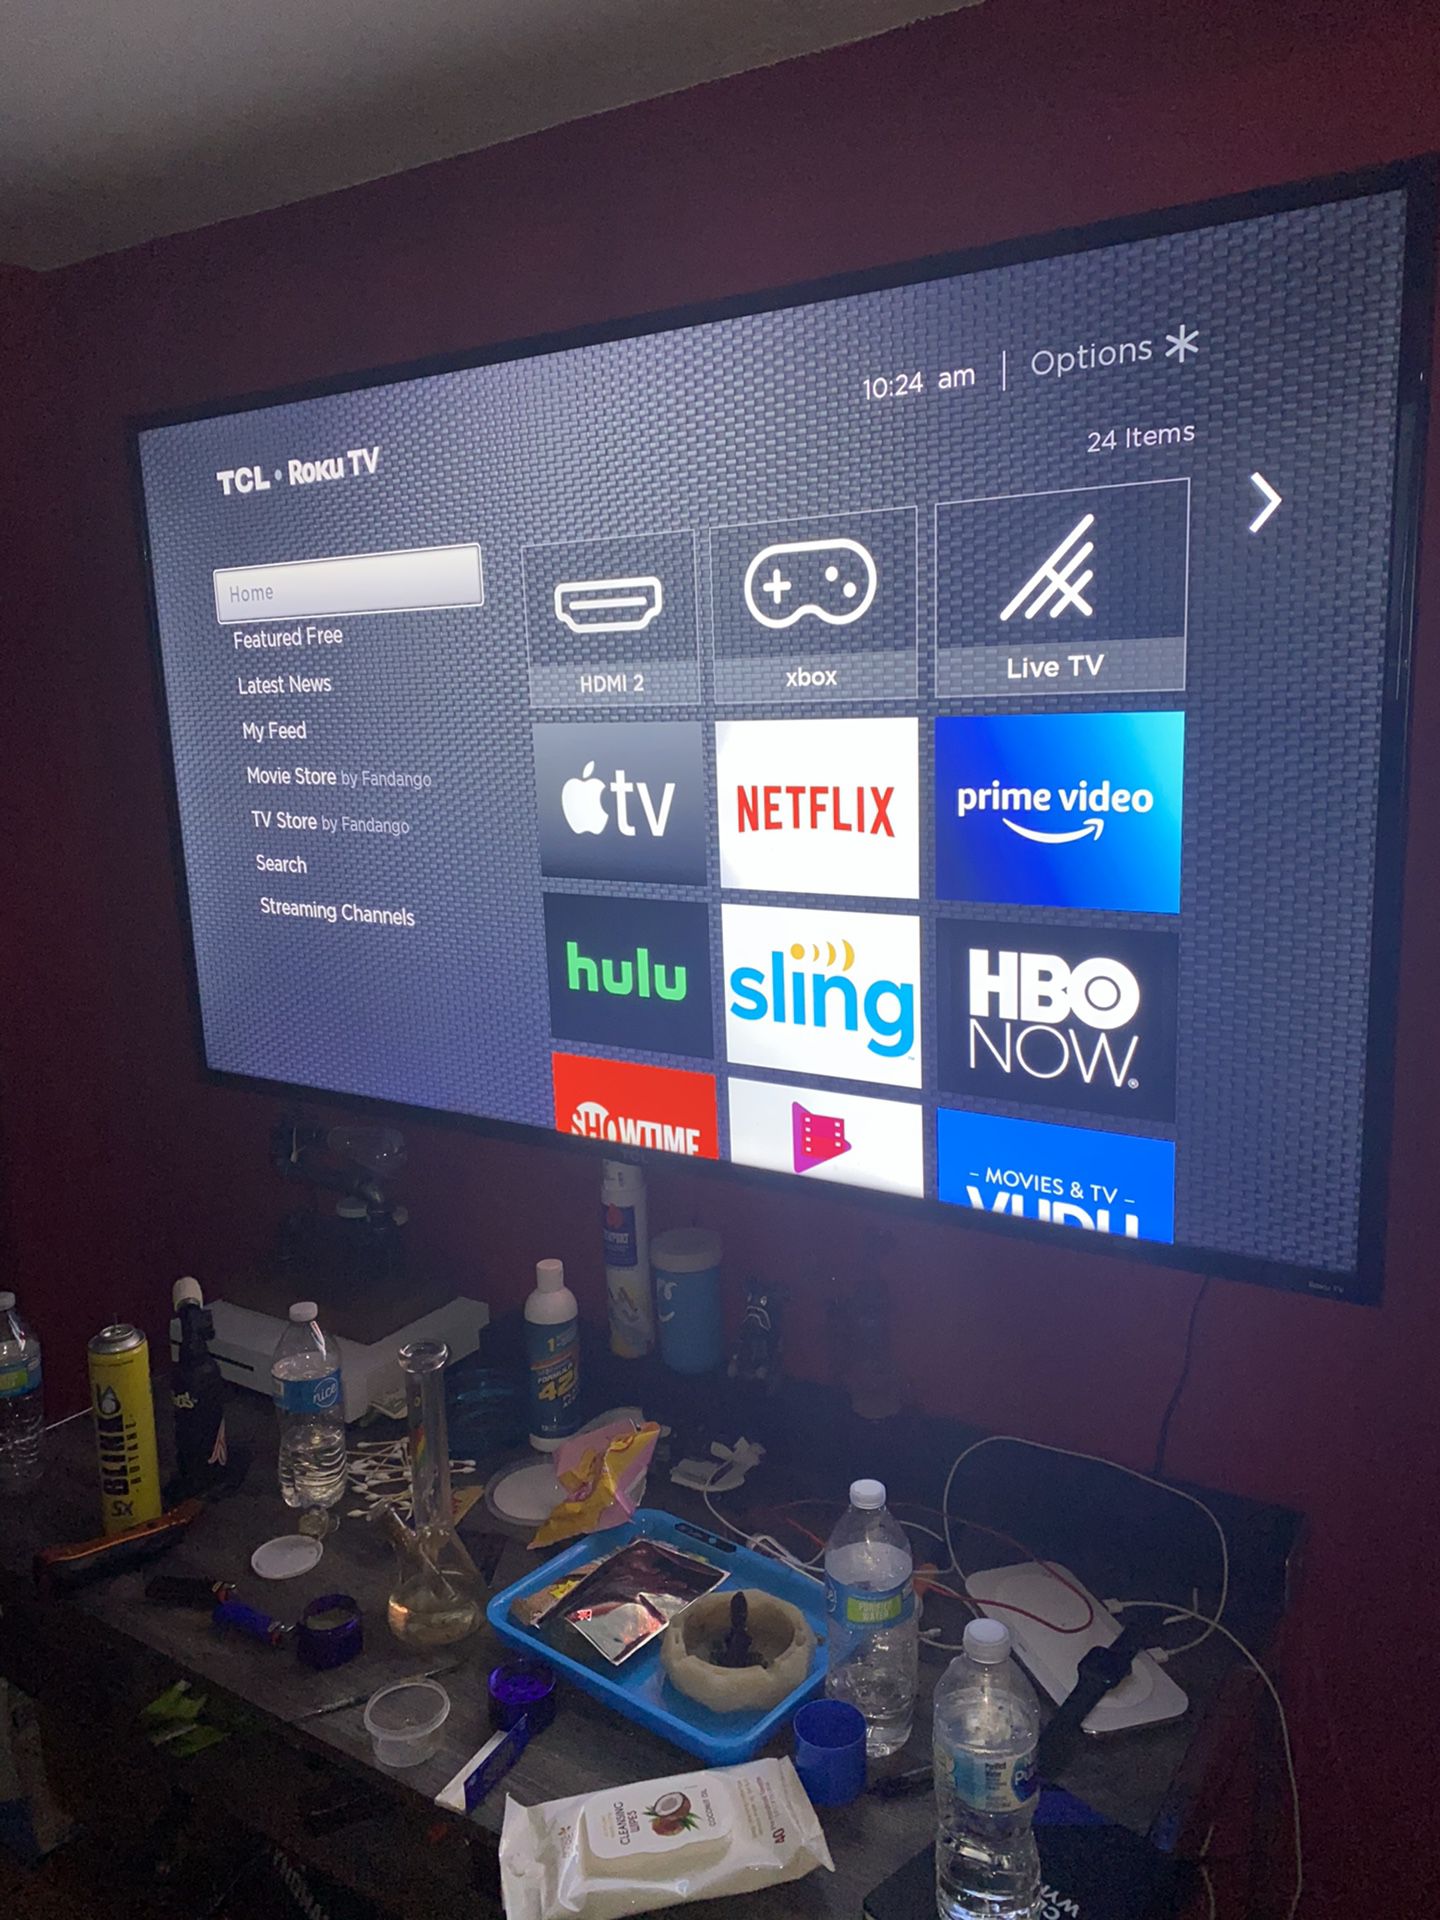 TCL ROKU TV with Vizio sound bar and subwoofer